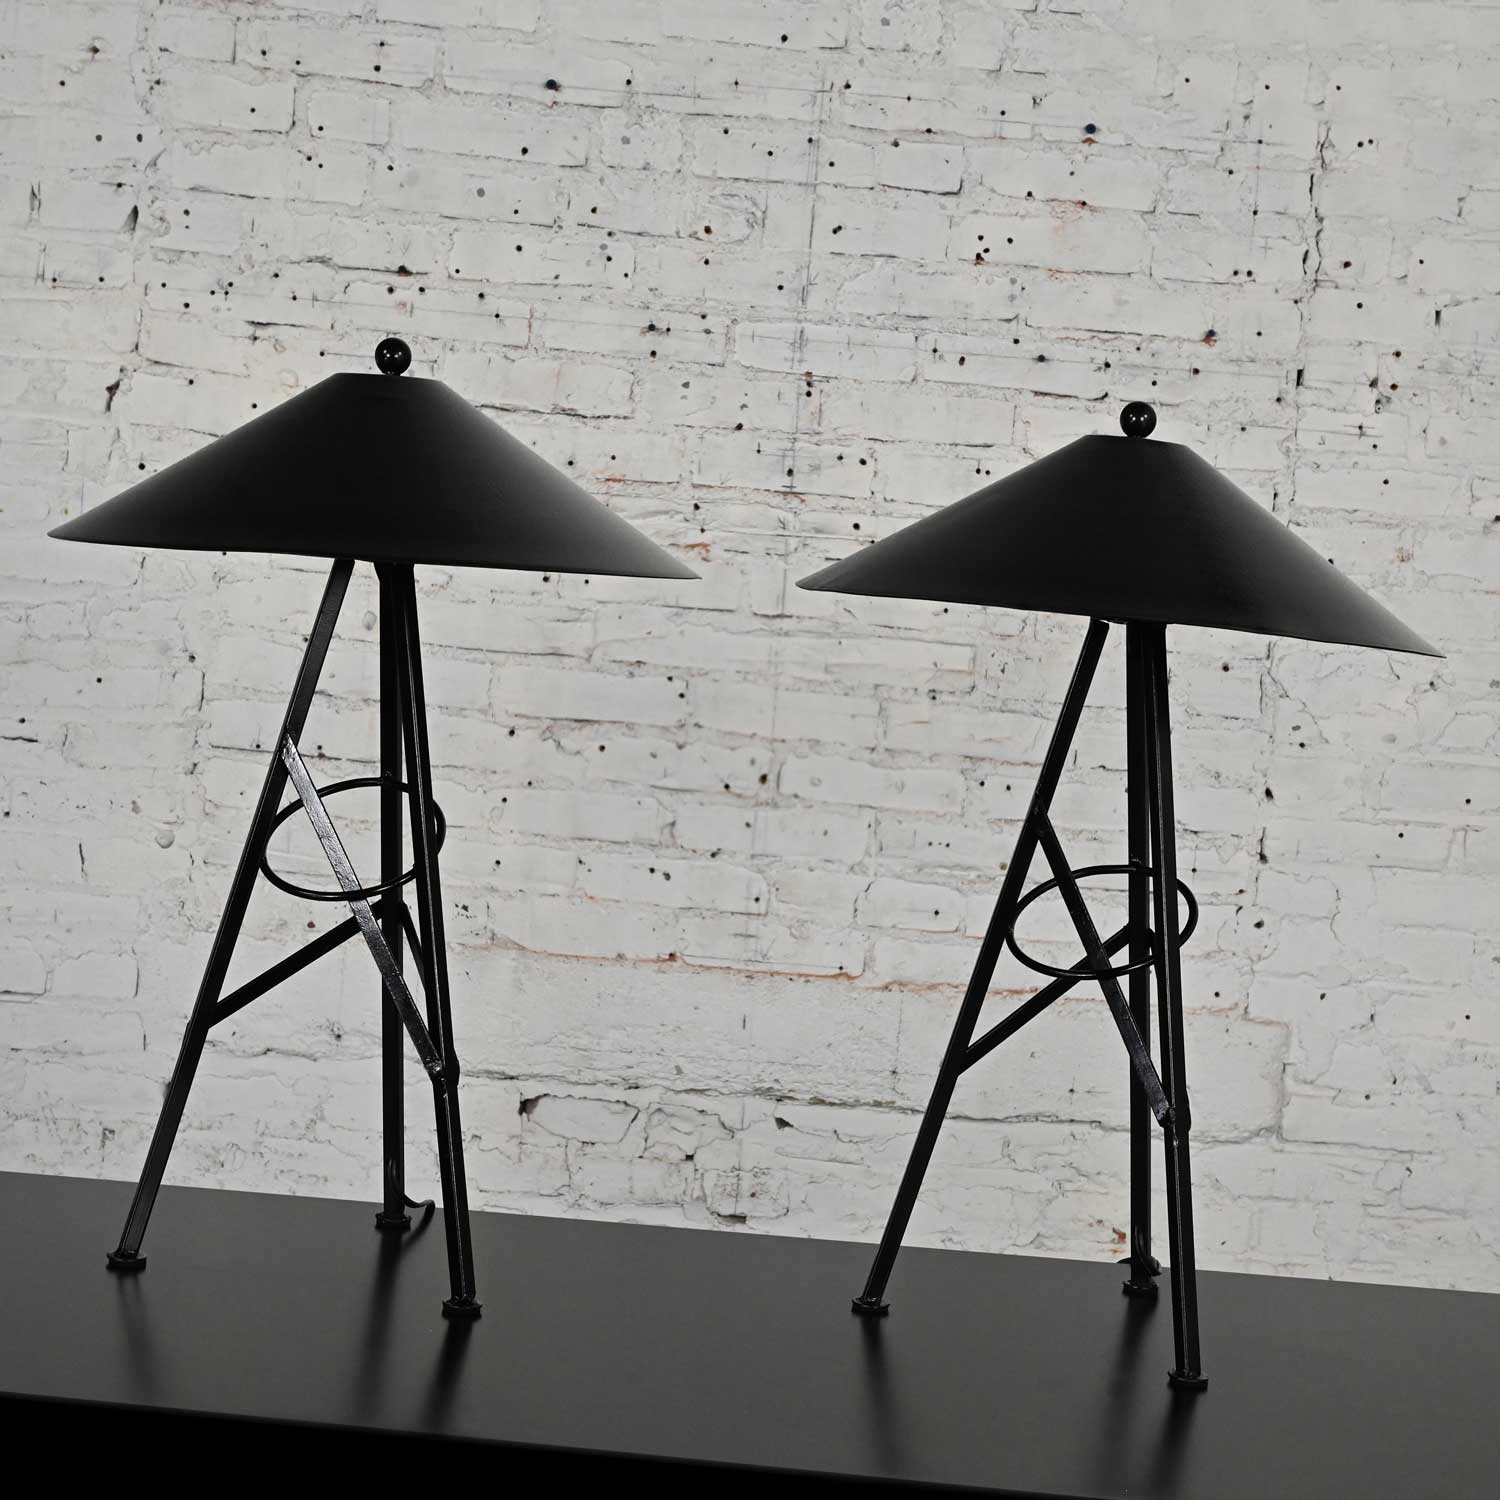 Late 20th Century Modern to Postmodern Metal Tri Leg Table Lamps with Aluminum Coolie Shades